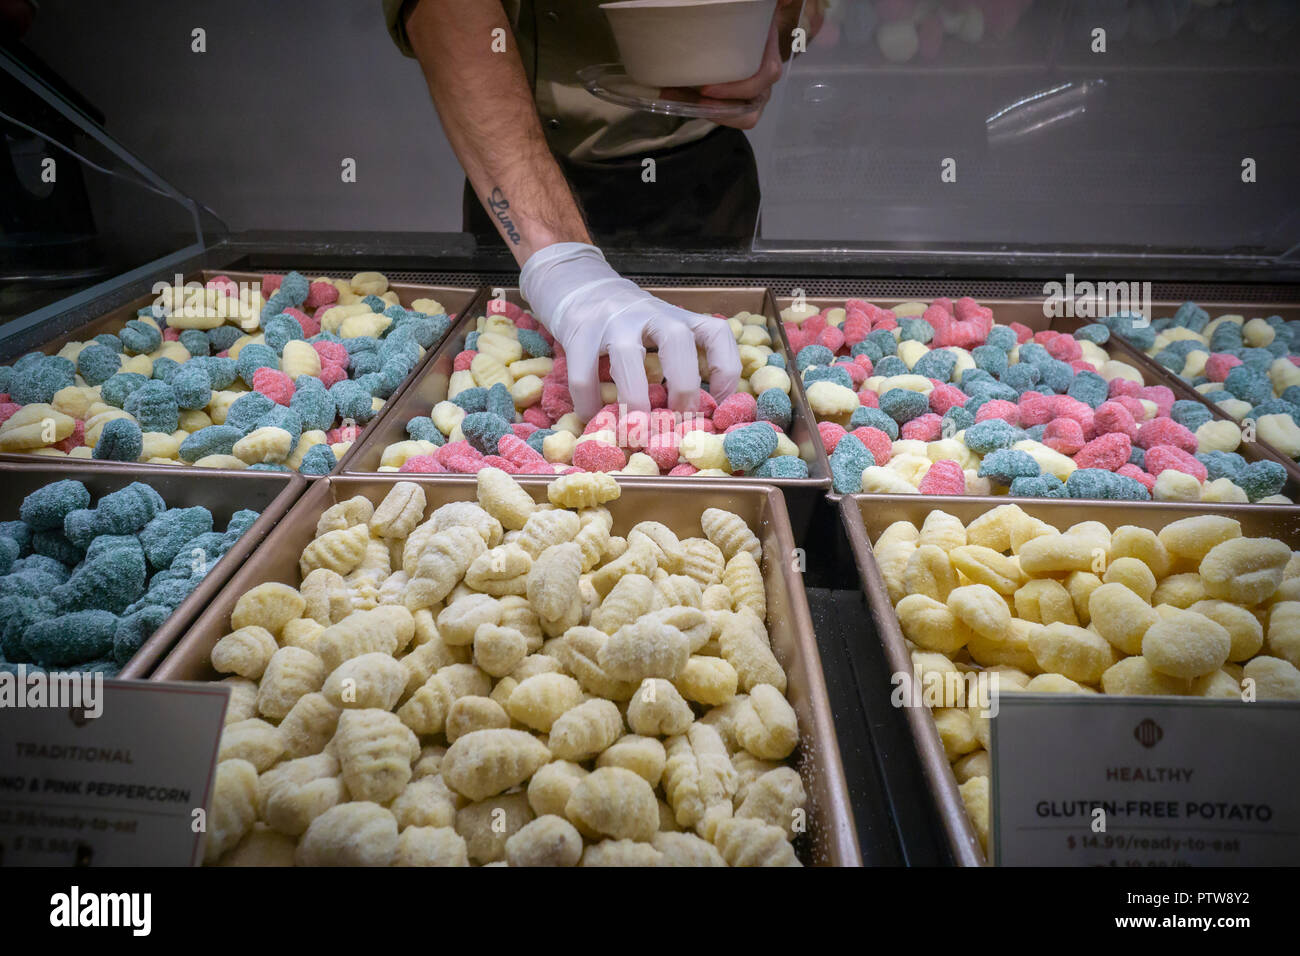 A worker prepares an order of tricolor gnocchi in Patavini, a Padua, Italy based gnocchi maker, at their newly opened store in New York on Wednesday, October 10, 2018. The gnocchis come in a myriad of different flavors and are sold by the pound to prepare at home or cooked as take-out. (© Richard B. Levine) Stock Photo